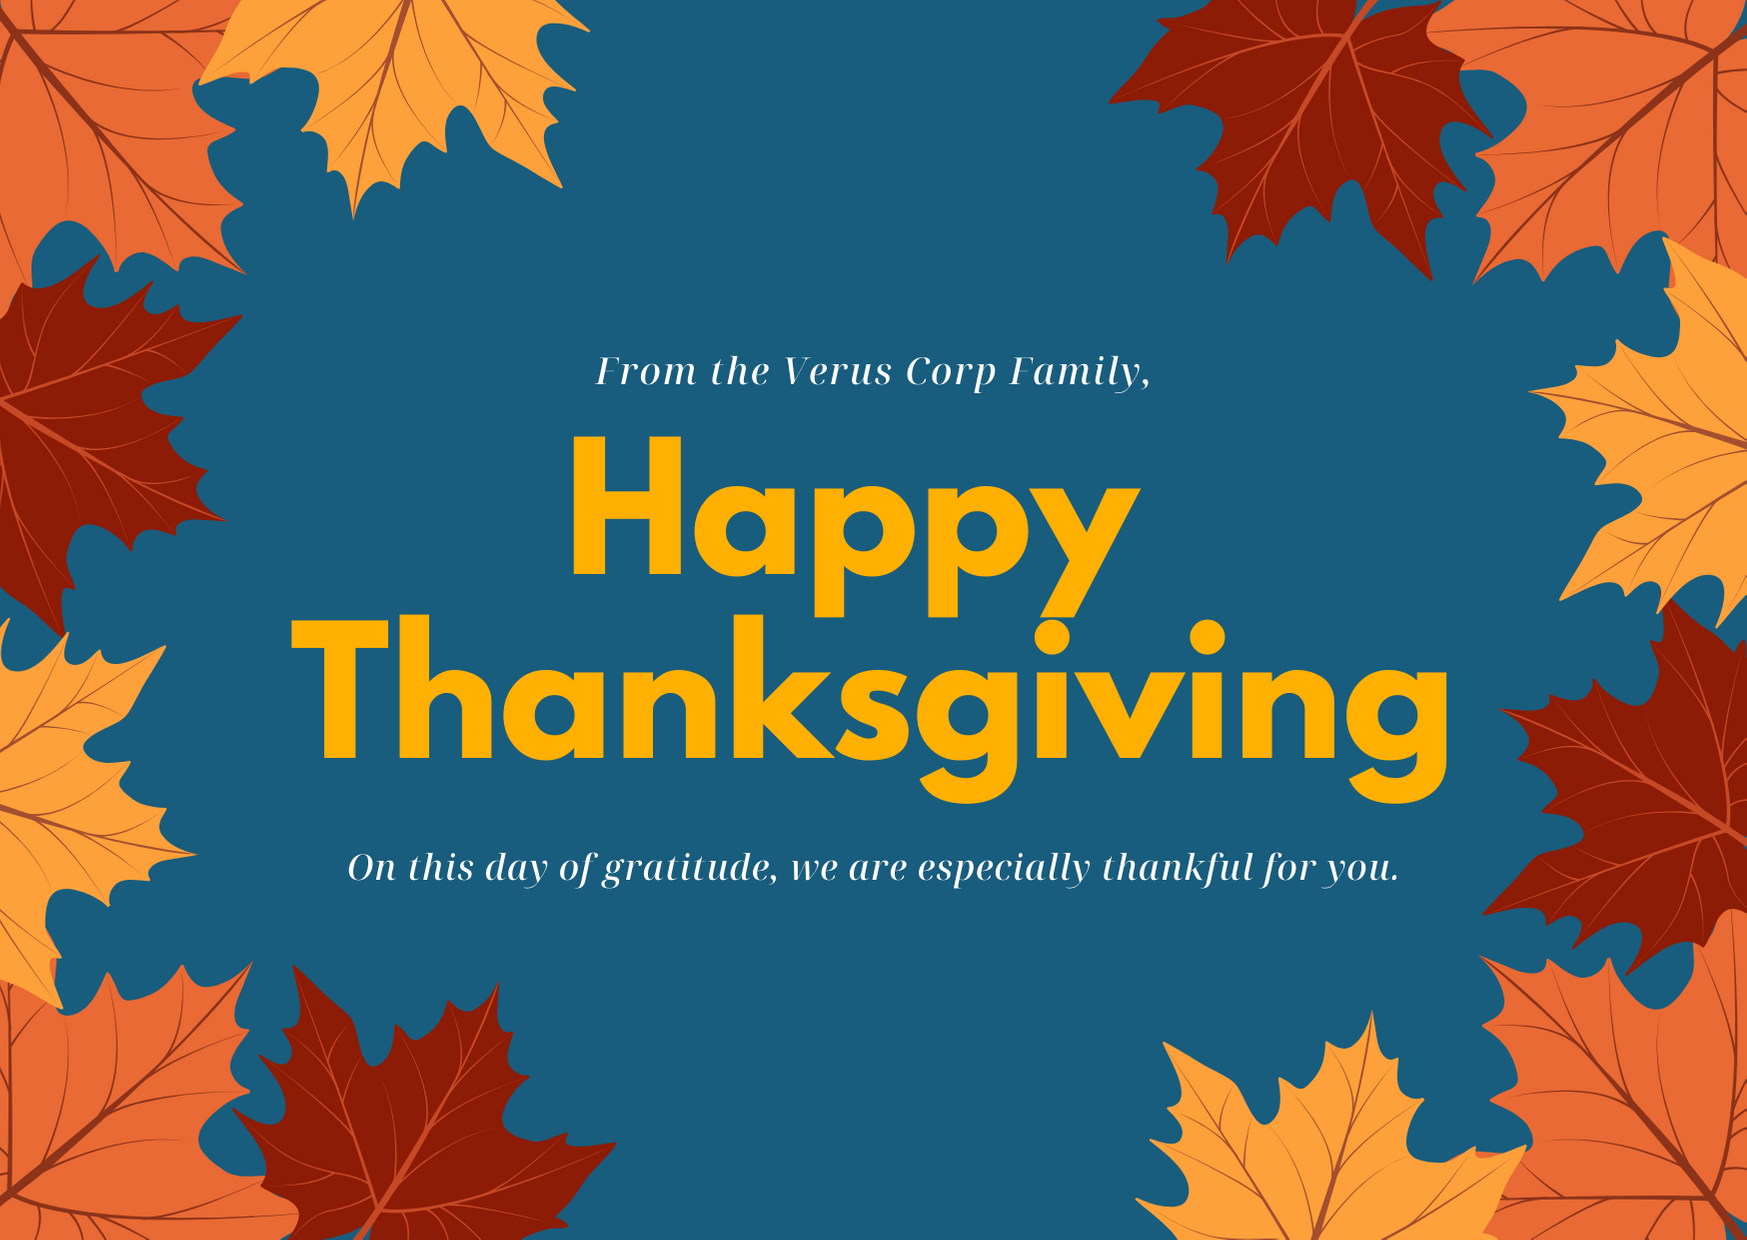 Happy Thanksgiving From The Verus Corp Family Minneapolis Cloud Services And Managed Service Provider Verus Corporation